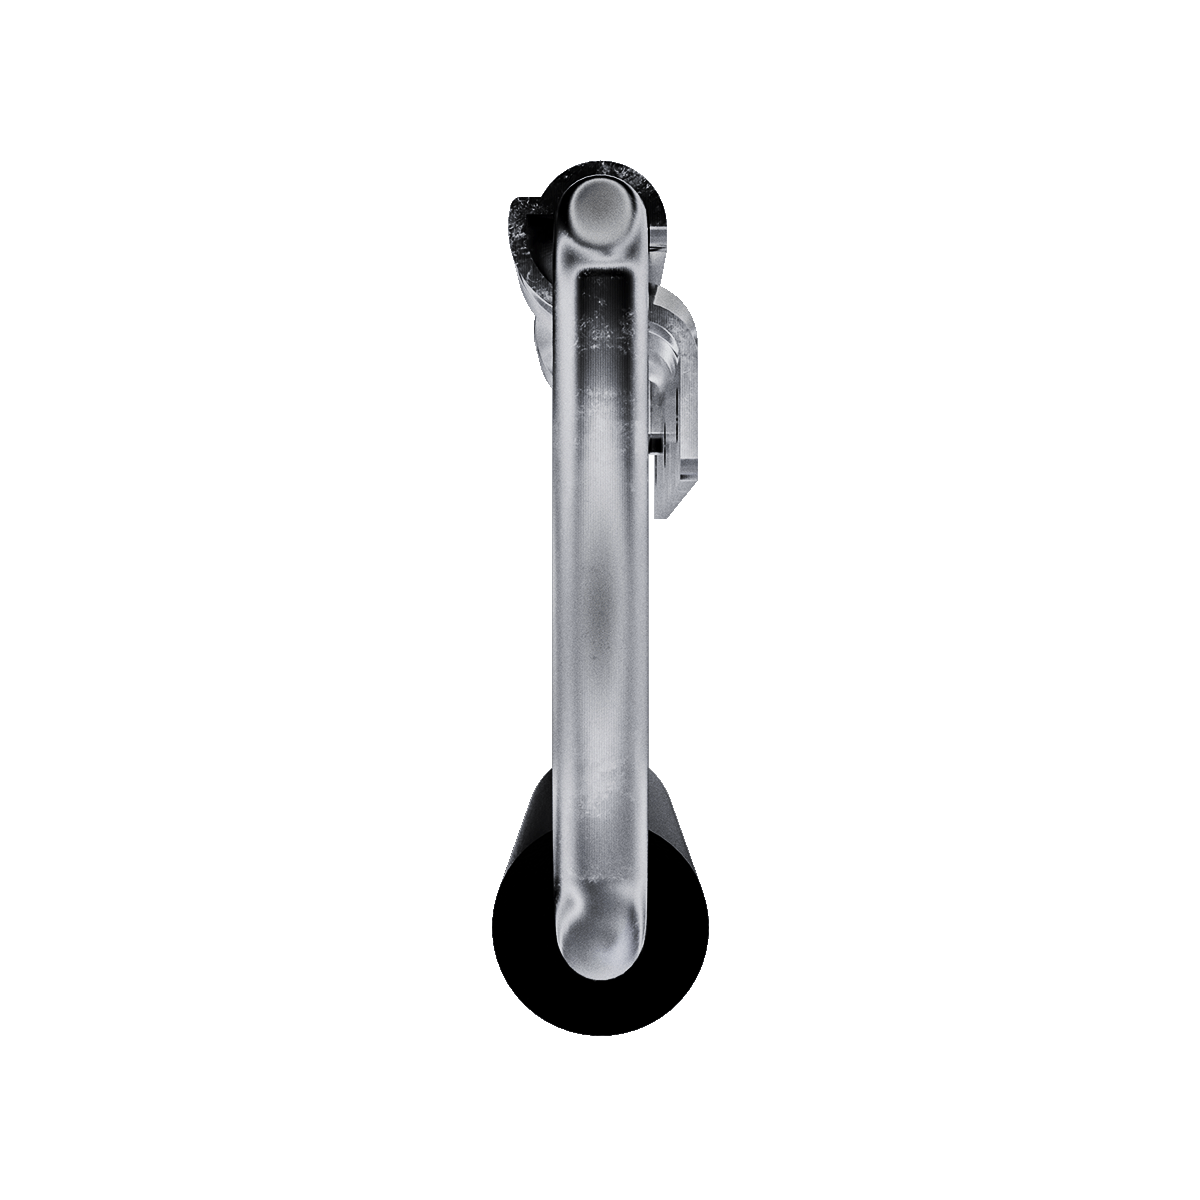 Medium surface mount handle, right view